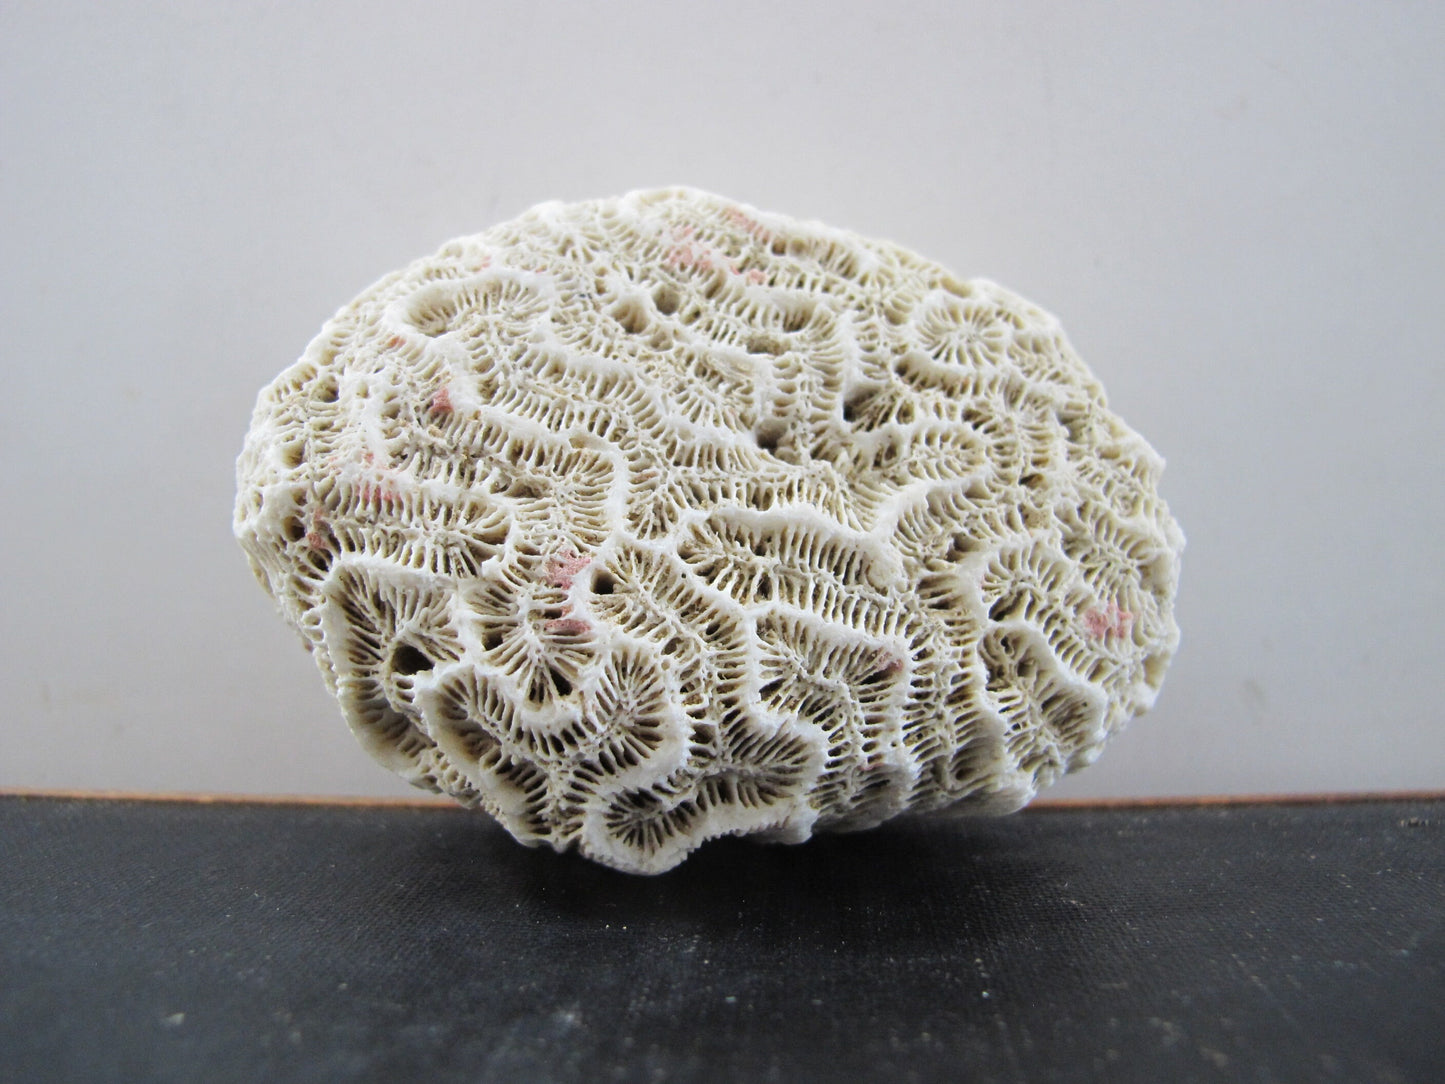 Coral Specimen Nautical Sea Creature Old Collection of Curiosities Beach Wunderkammer